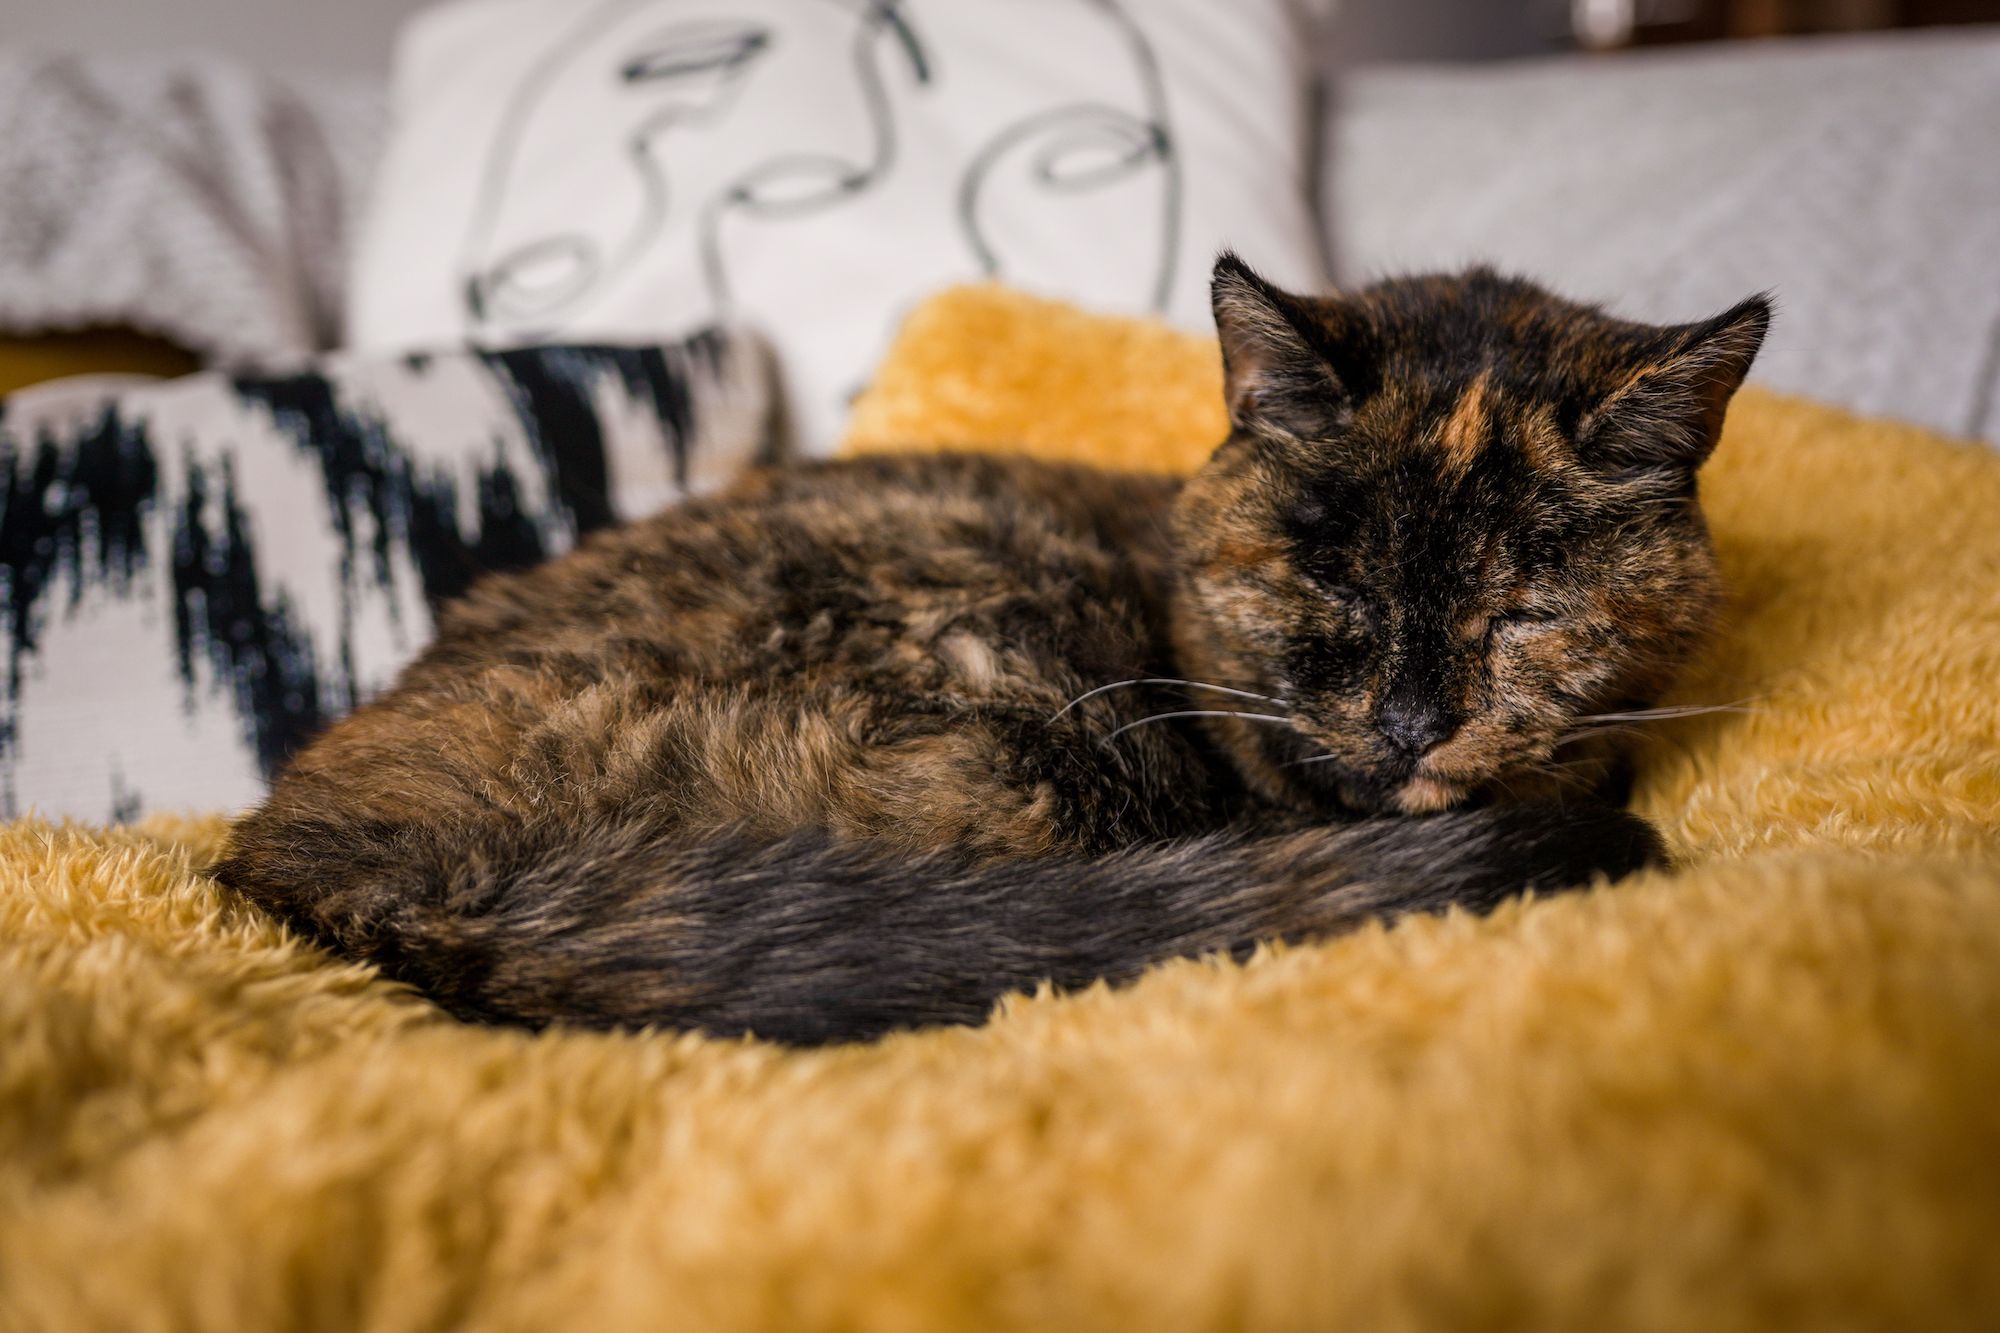 Flossie, the world's oldest living cat, is nearly 27 years old | CNN